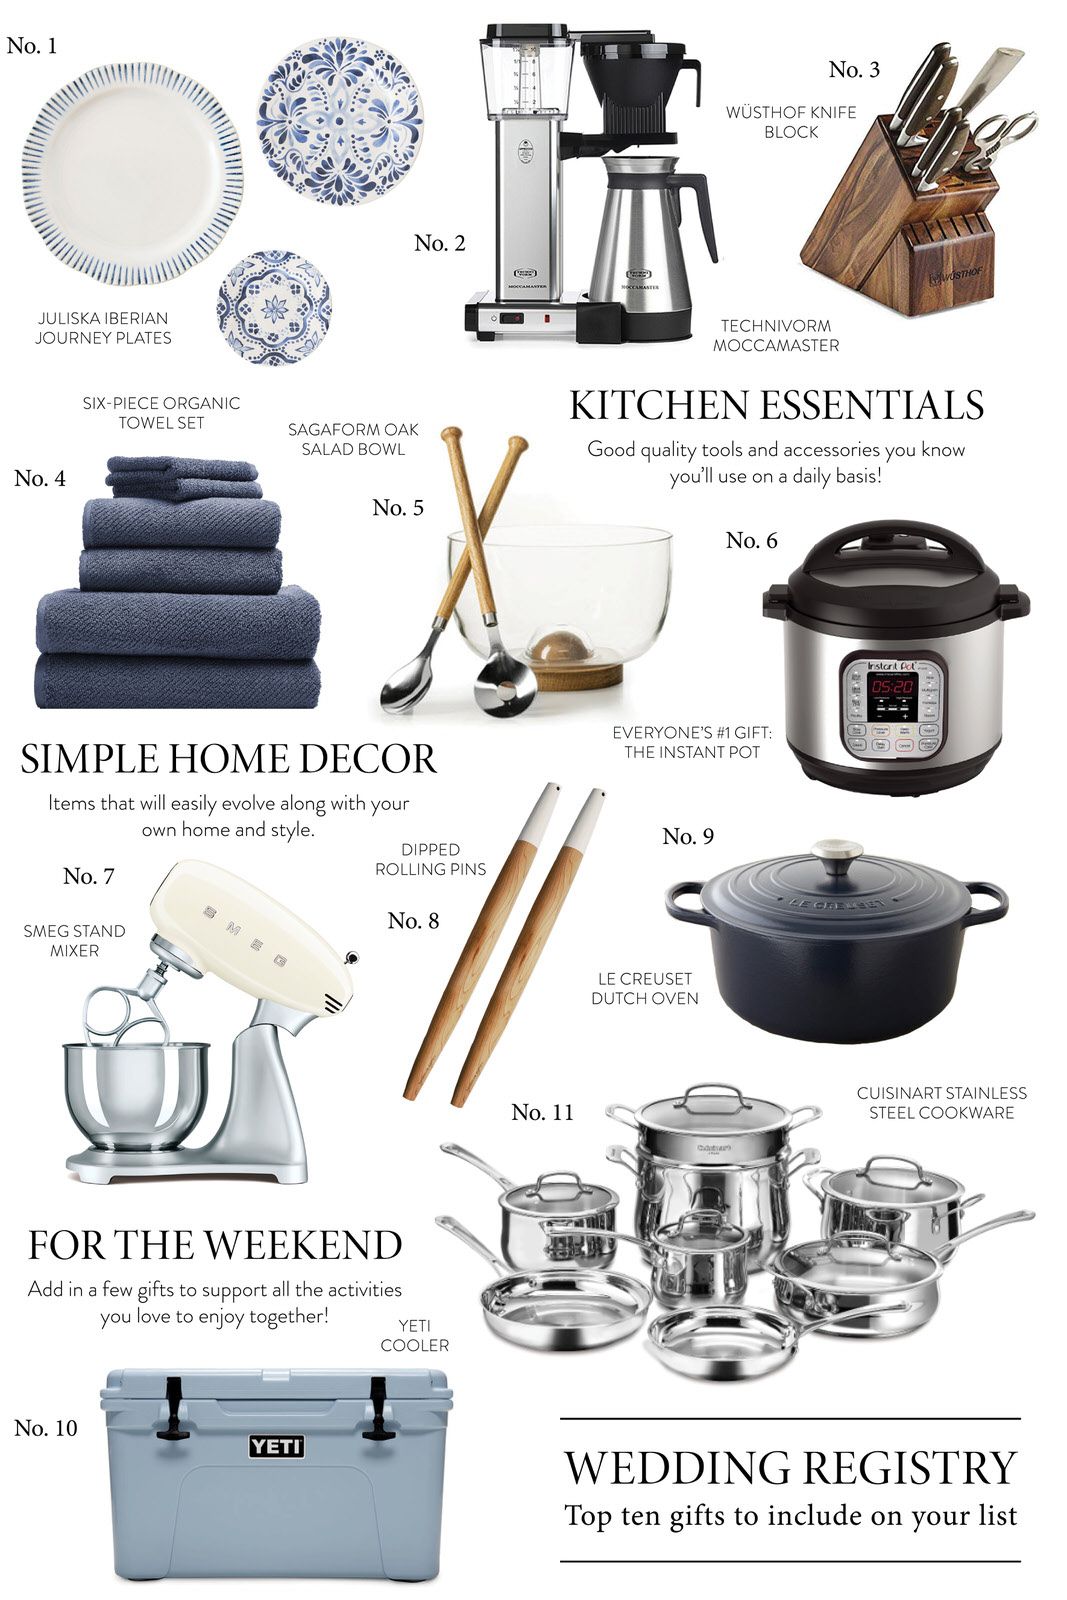 Ten Items to Include on Your Wedding Registry